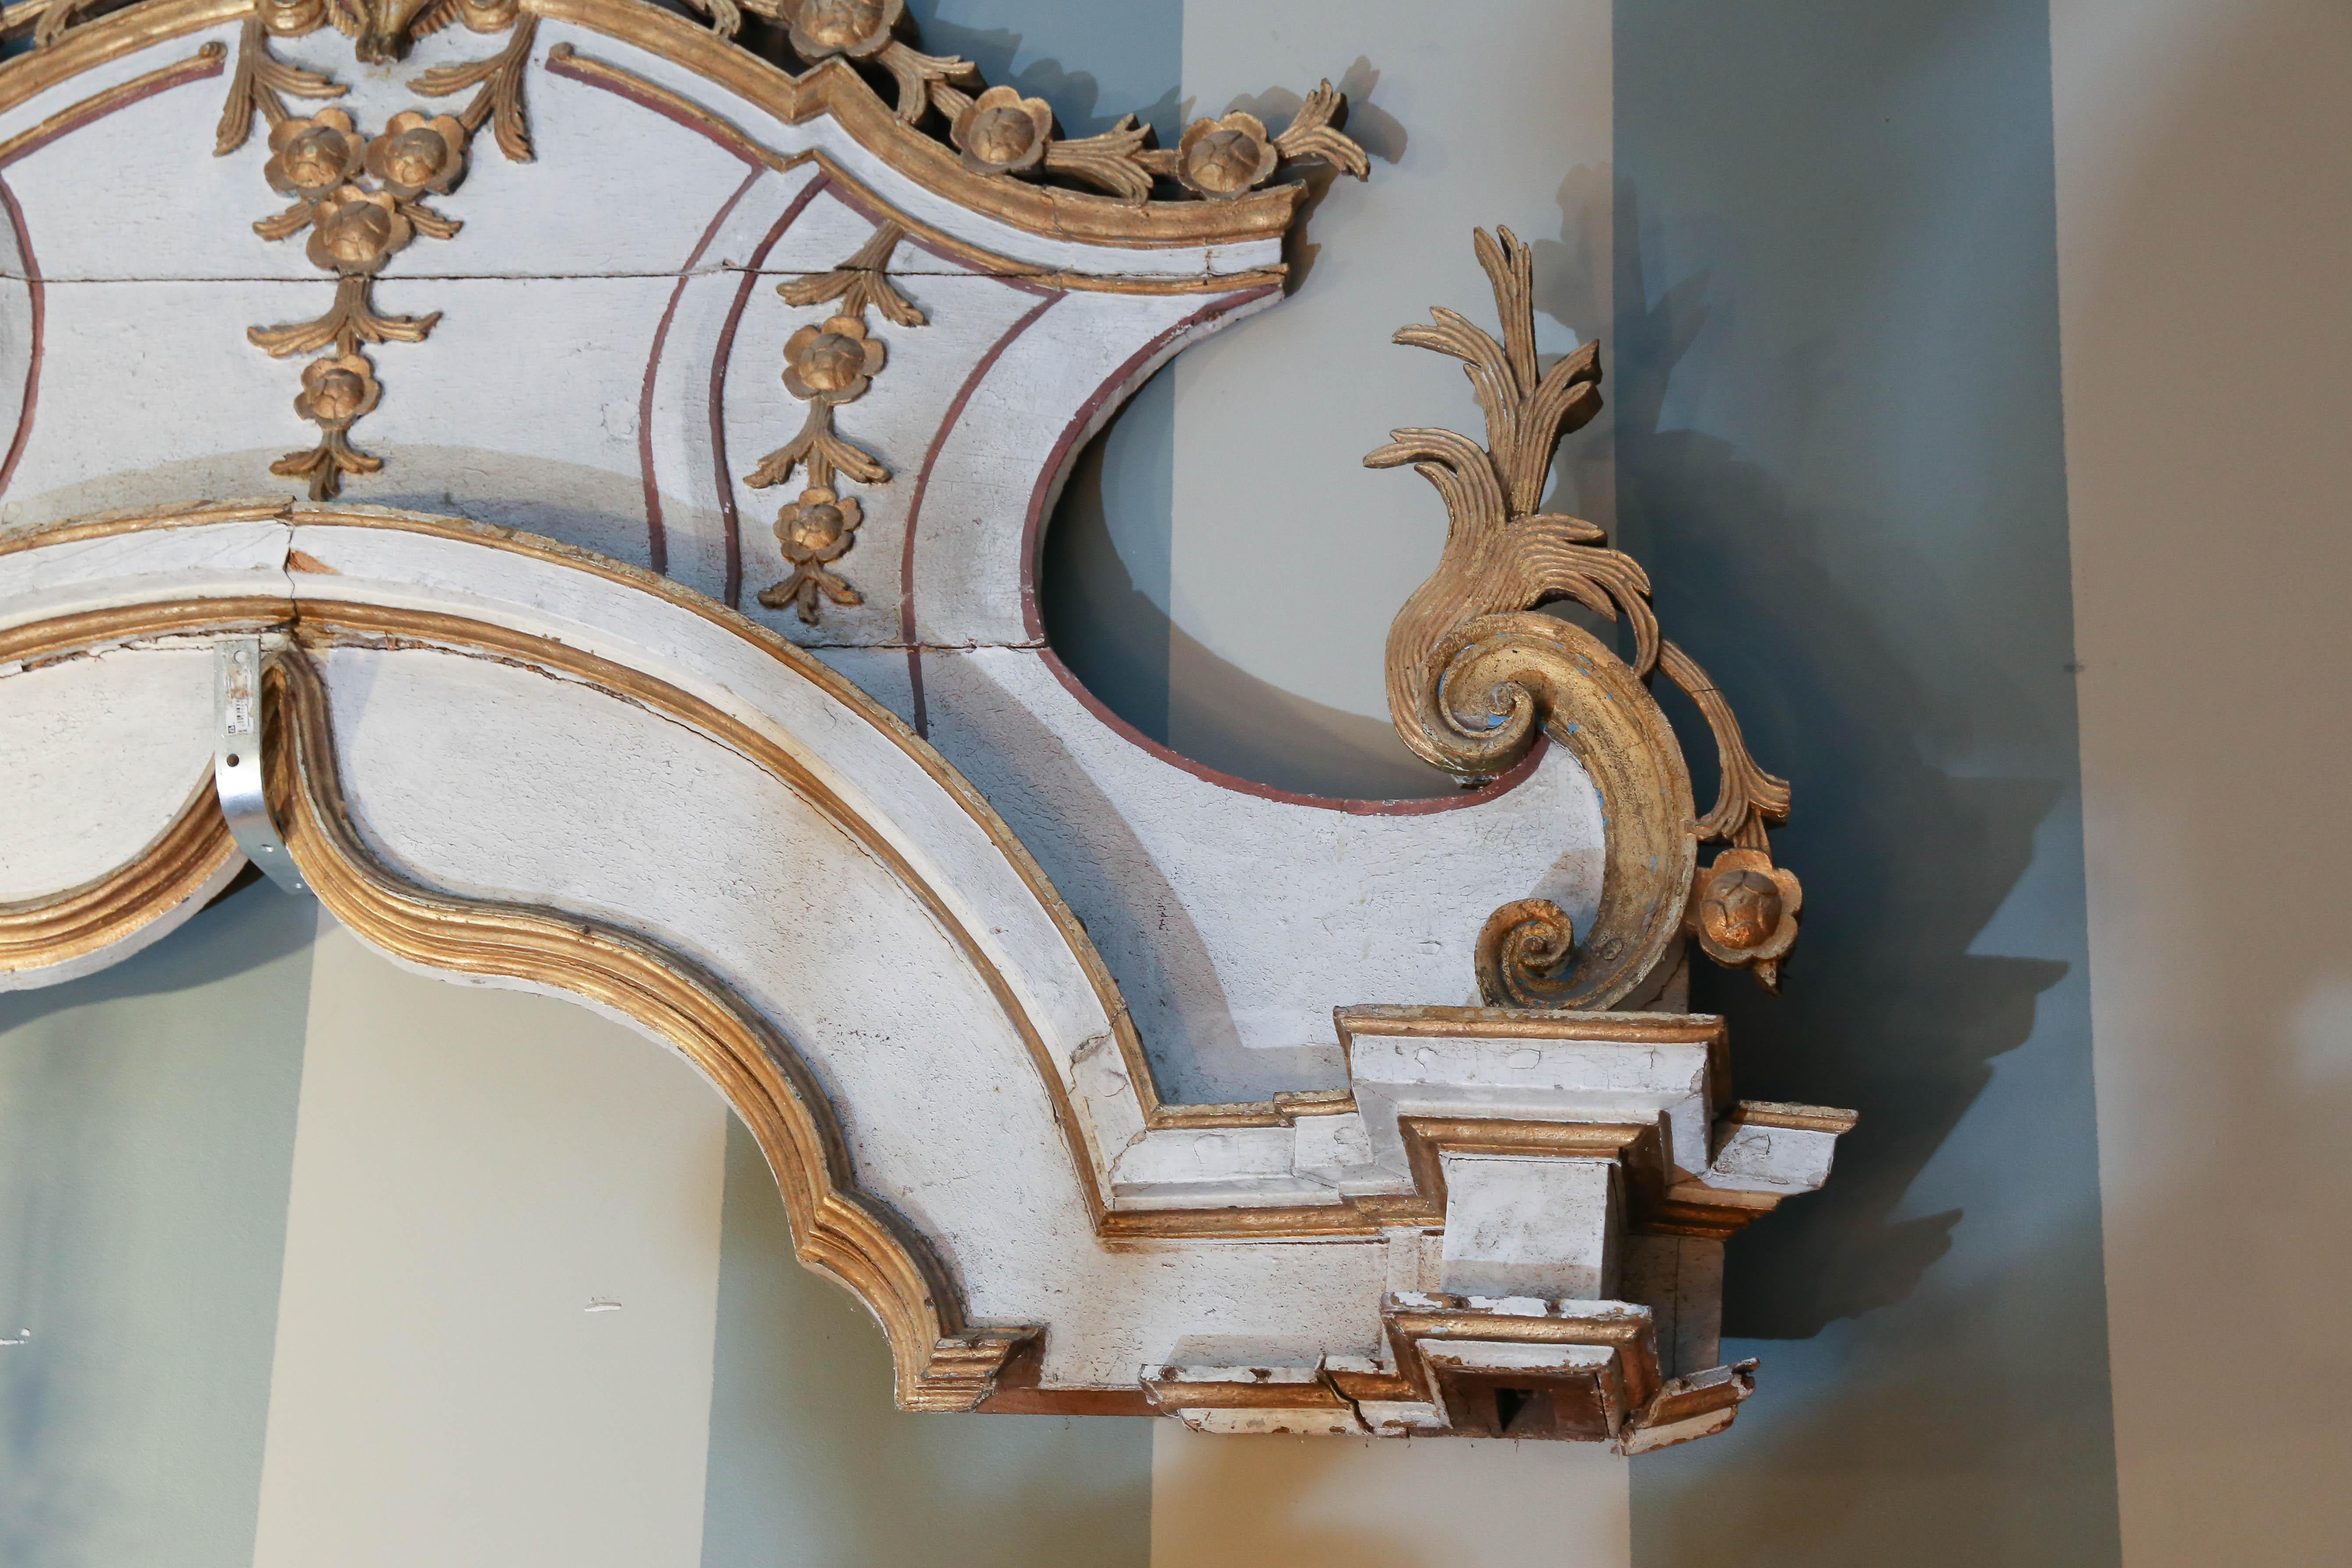 Architectural element is carved, painted, and gilt was possibly an elaborate overdoor.

Piece has great possibilities to be fashioned into a headboard, or any number of interesting items.

Wonderfully eccentric.